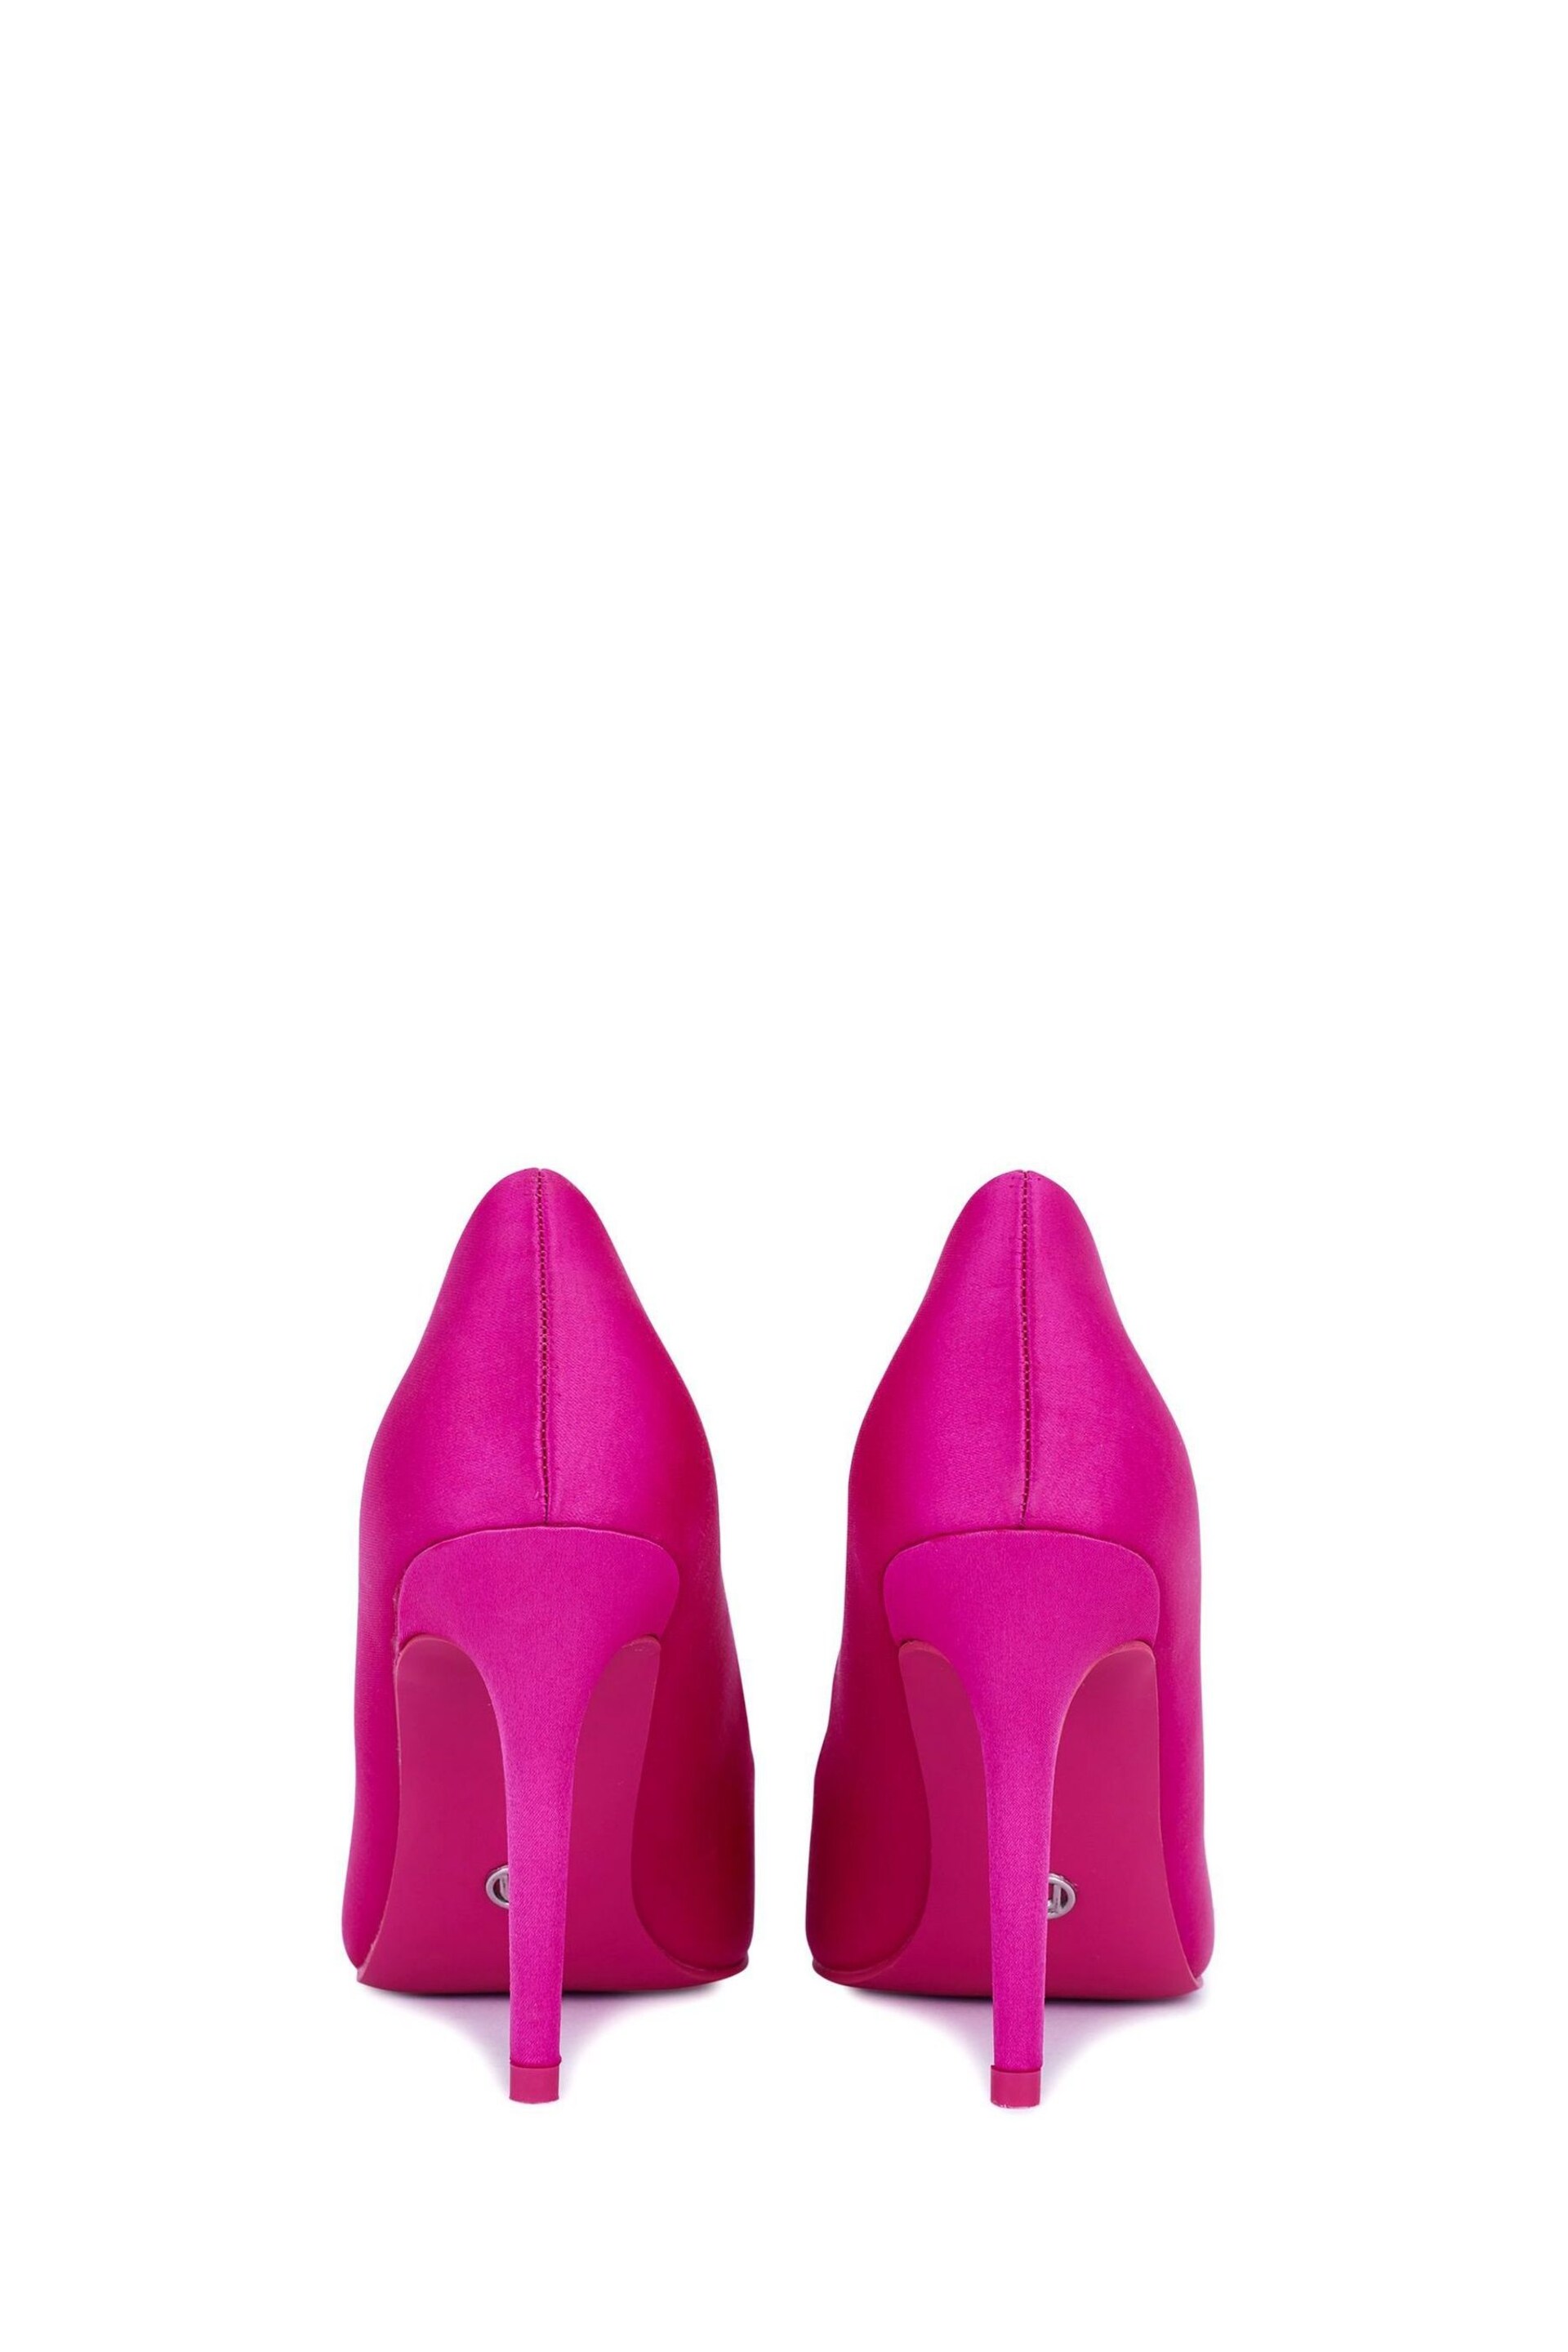 Novo Pink Crissy Court Shoes - Image 5 of 5